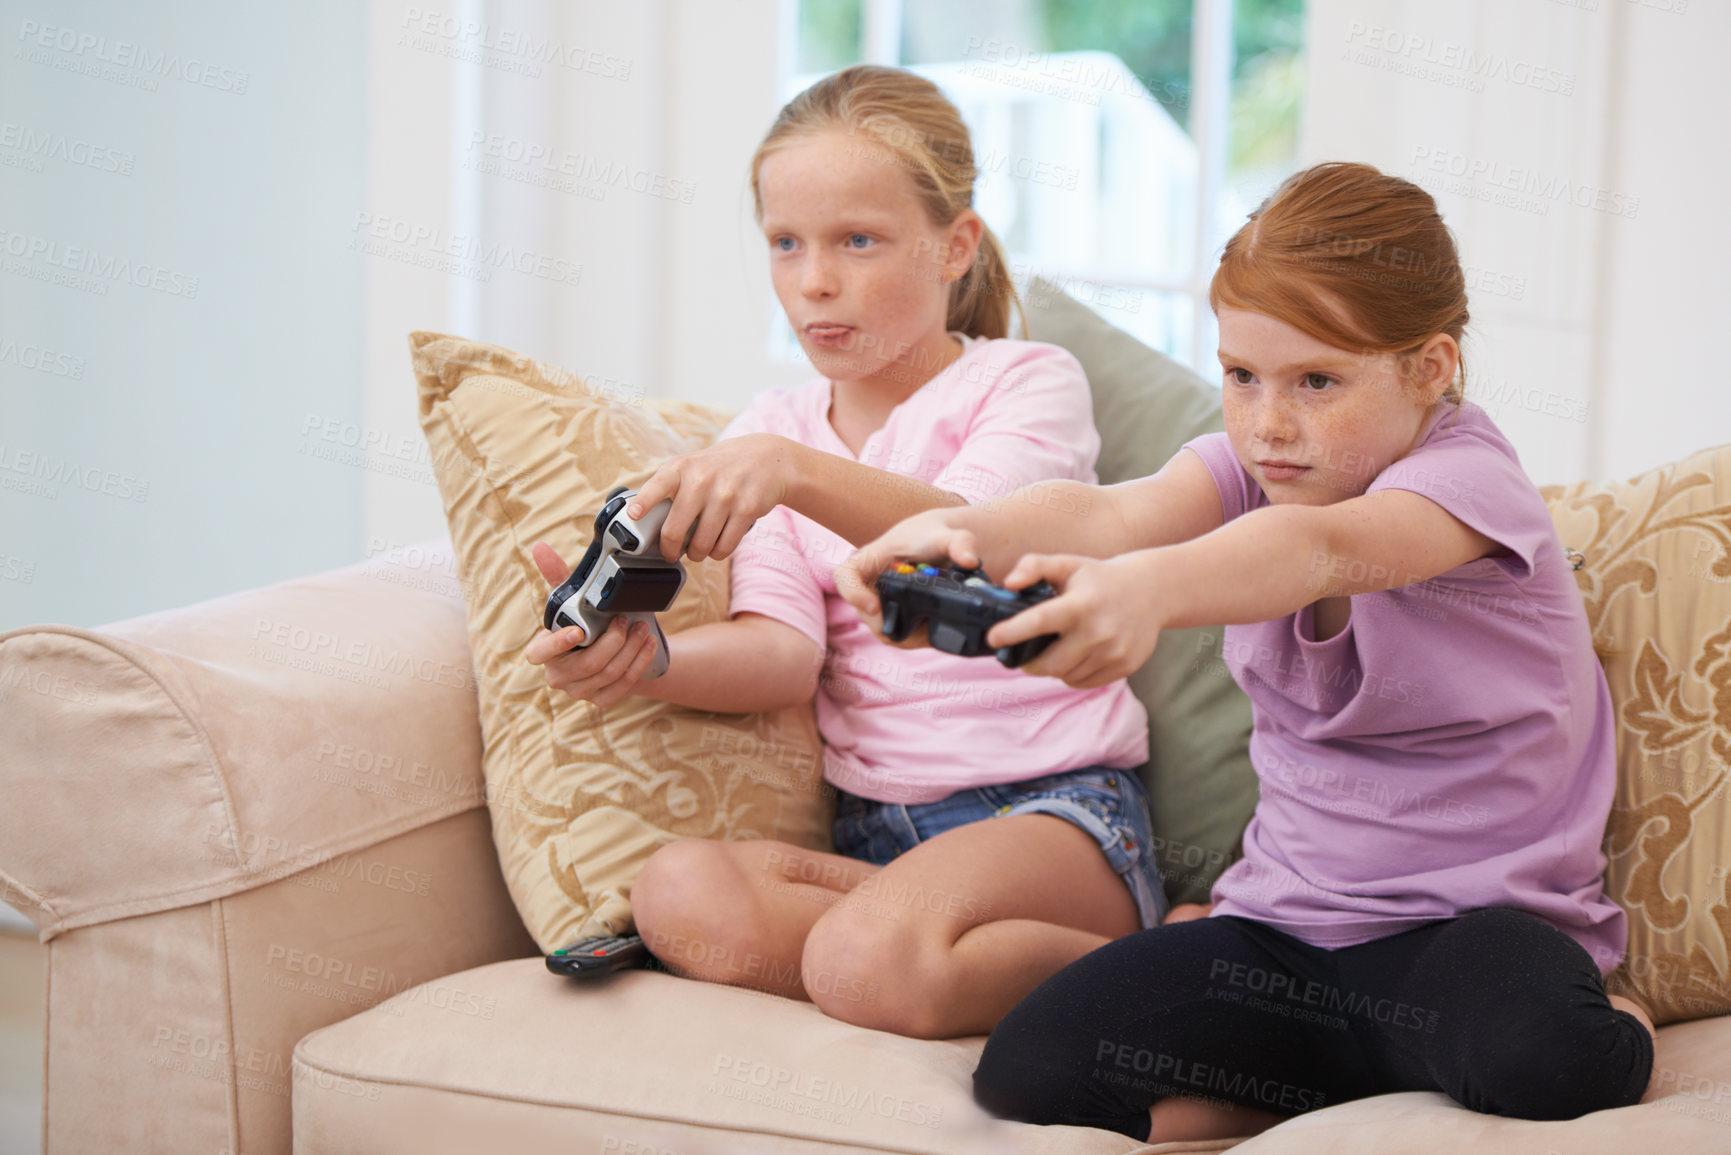 Buy stock photo Home, joystick or happy kids gaming to play online with controller on couch or sofa in living room. Children, fun experience or young girl gamers with smile for video games, contest or technology